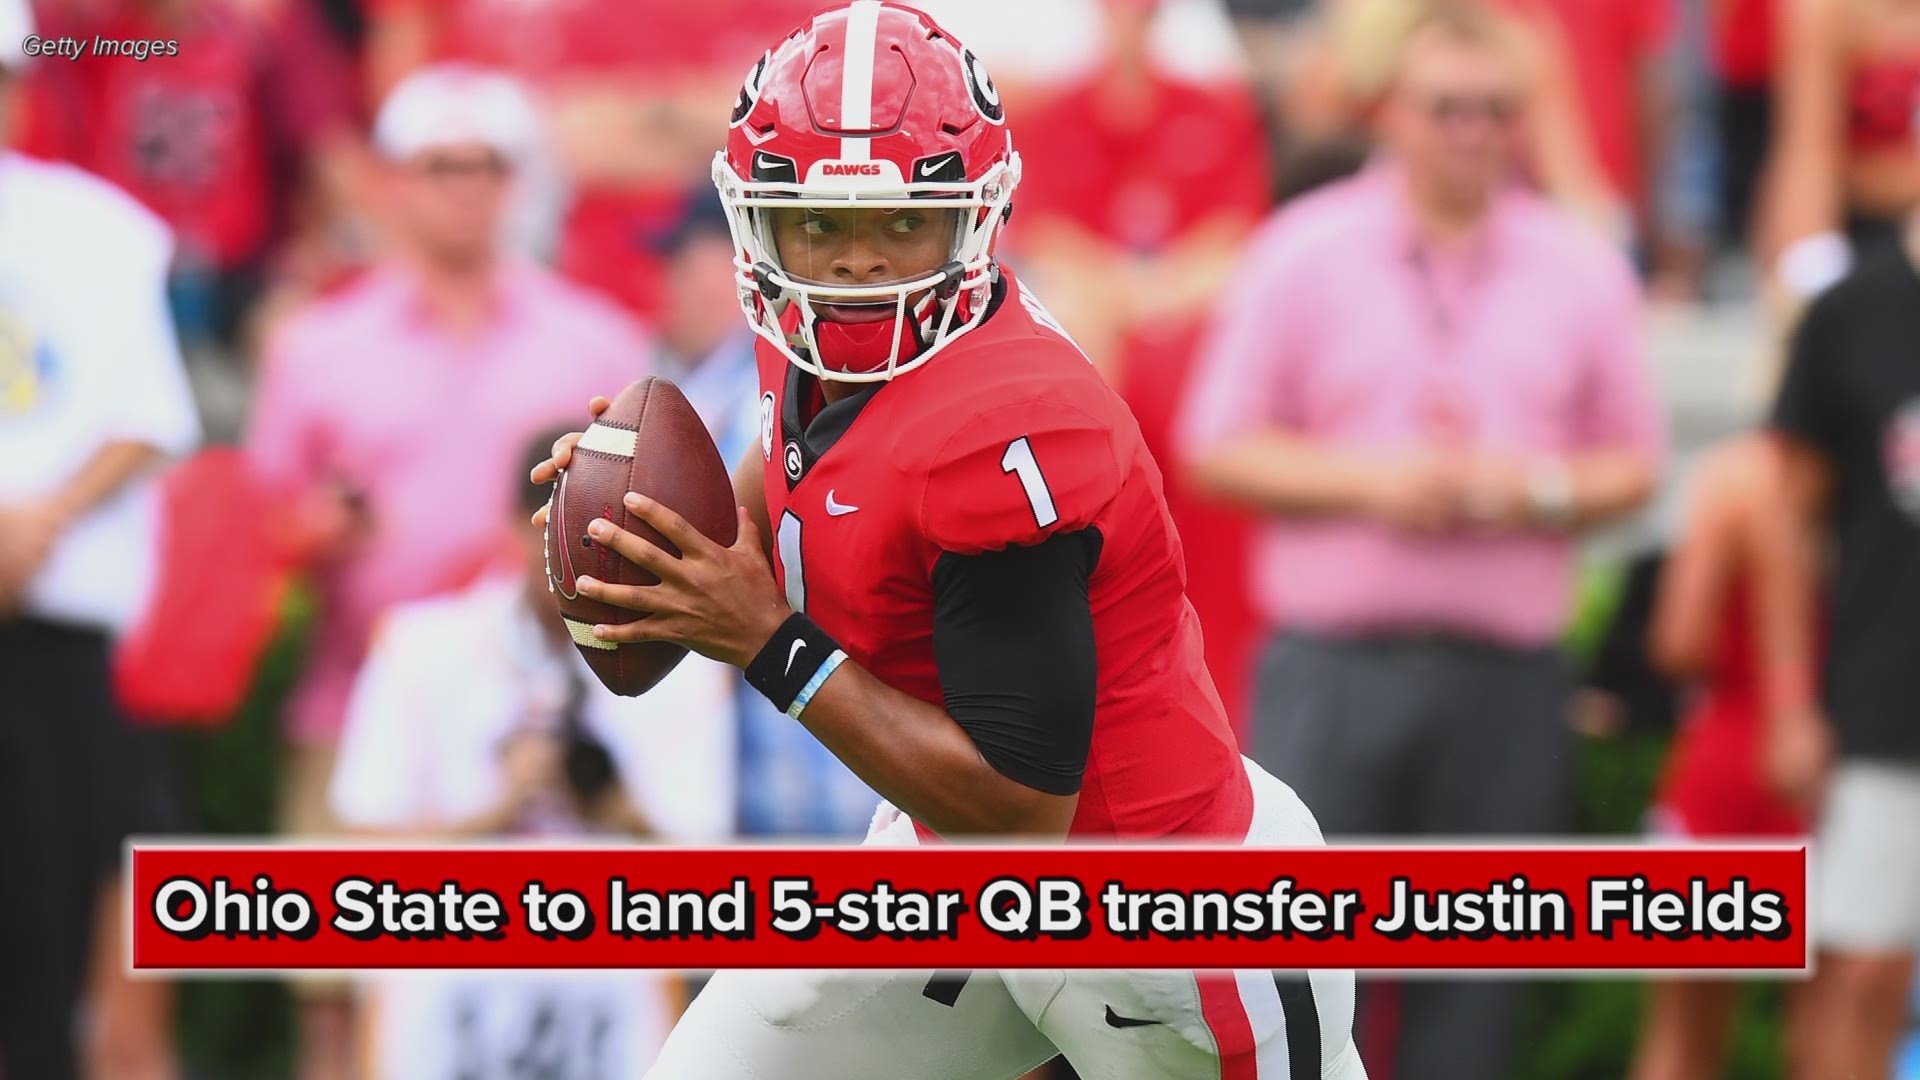 Lettermen Row on X: Early Friday we reported that Justin Fields